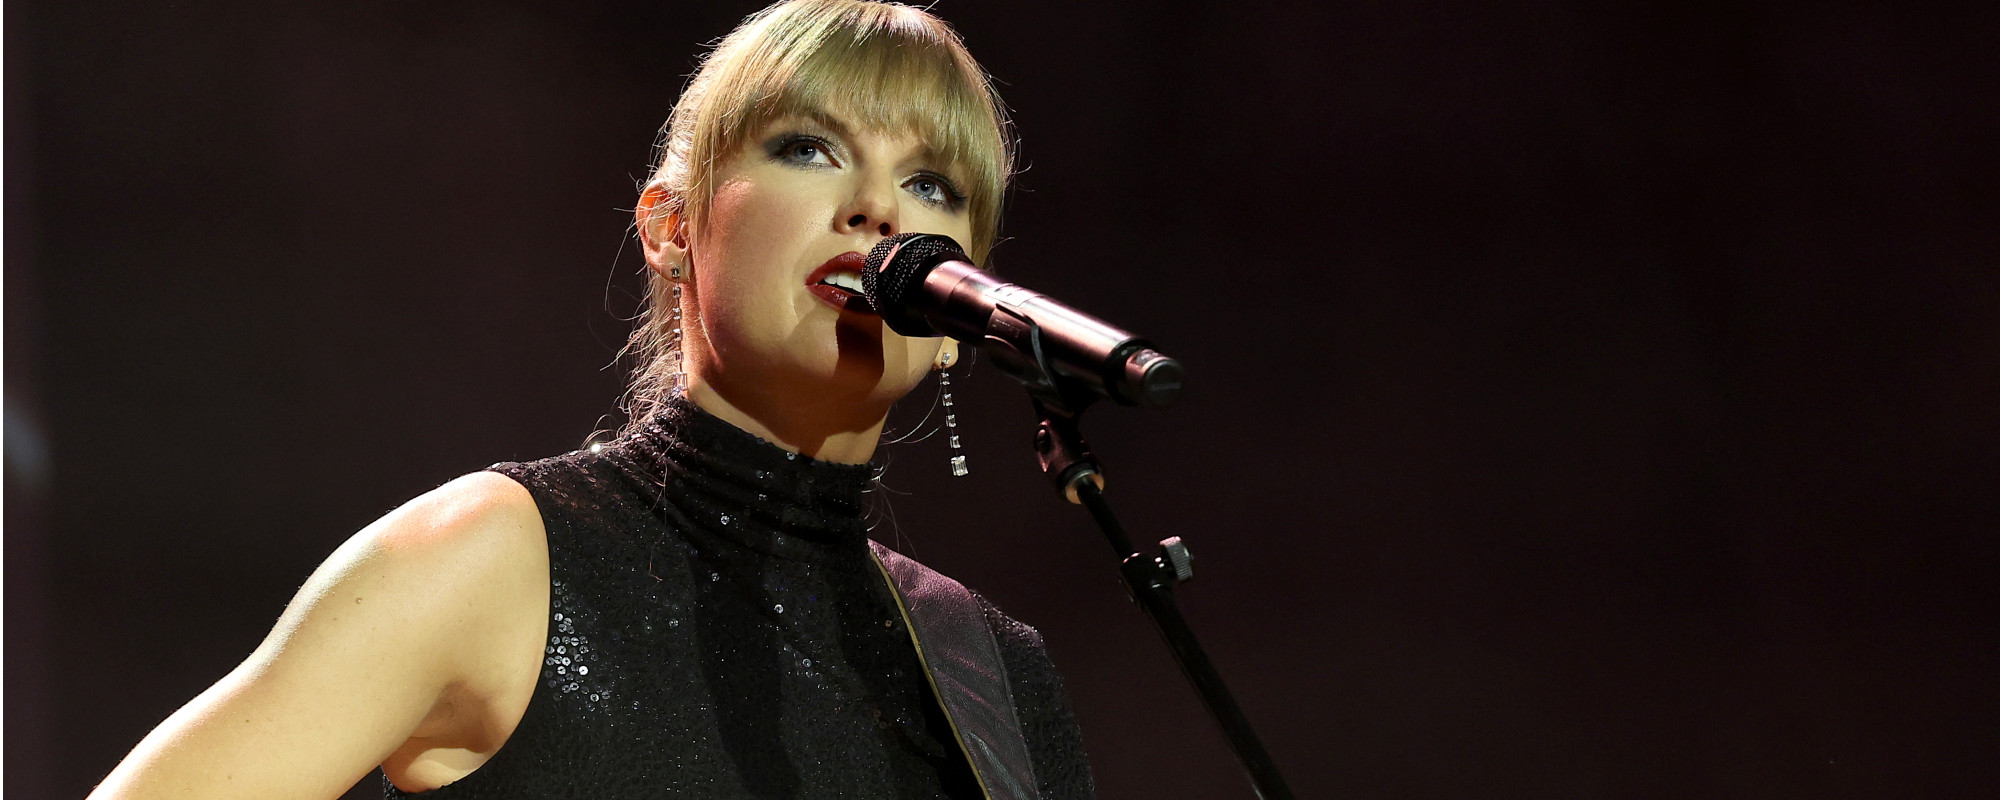 “Emotional” Swiftie Responds to Backlash Over Viral Reaction to Taylor Swift Performance